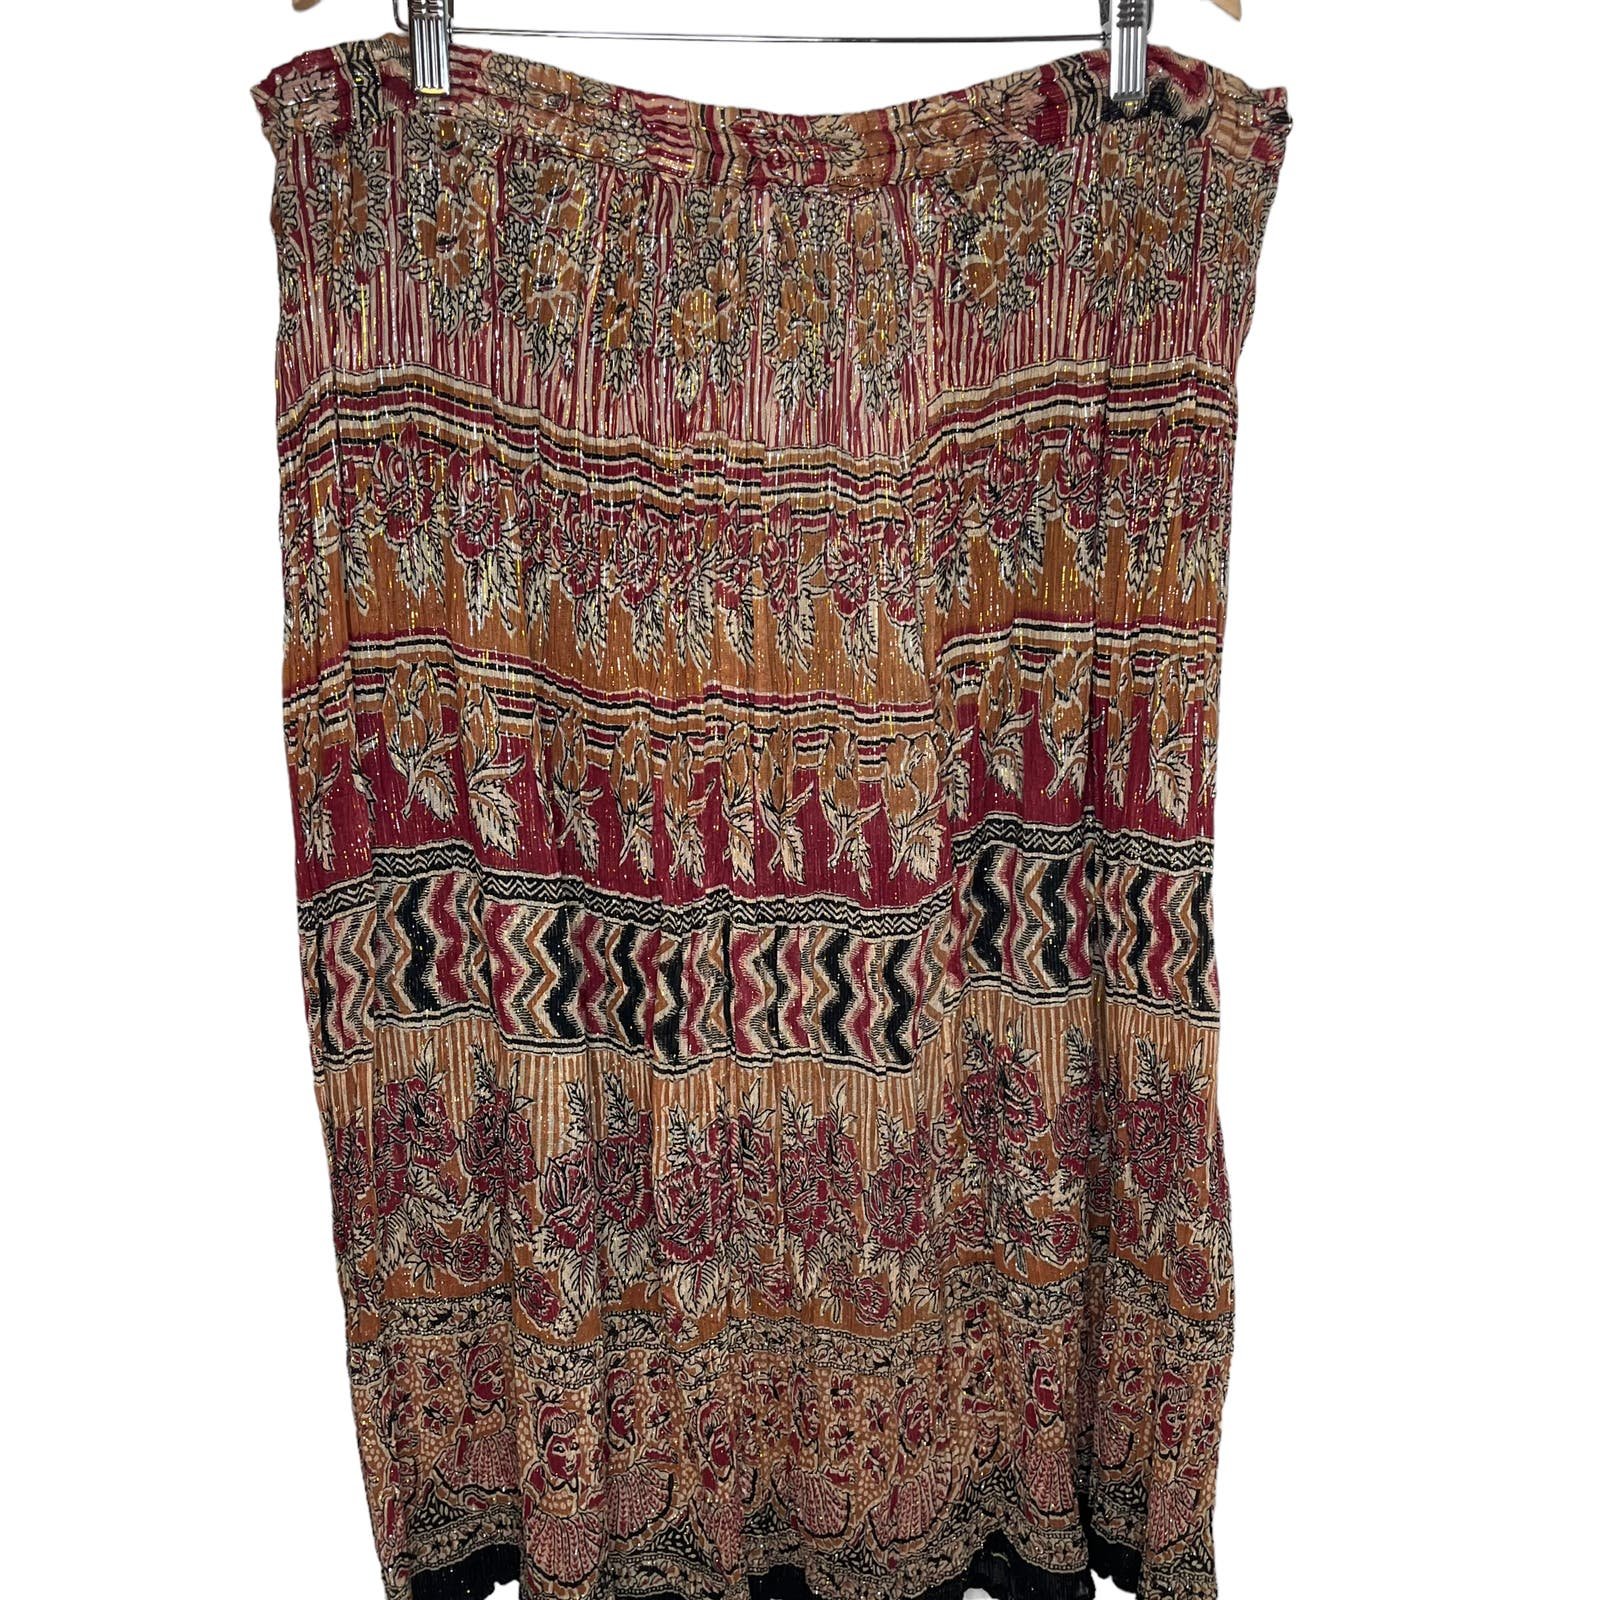 reasonable price Vercellino Designs Vintage Boho Skirt Made in Mexico One Size FYHy3nqdp Factory Price